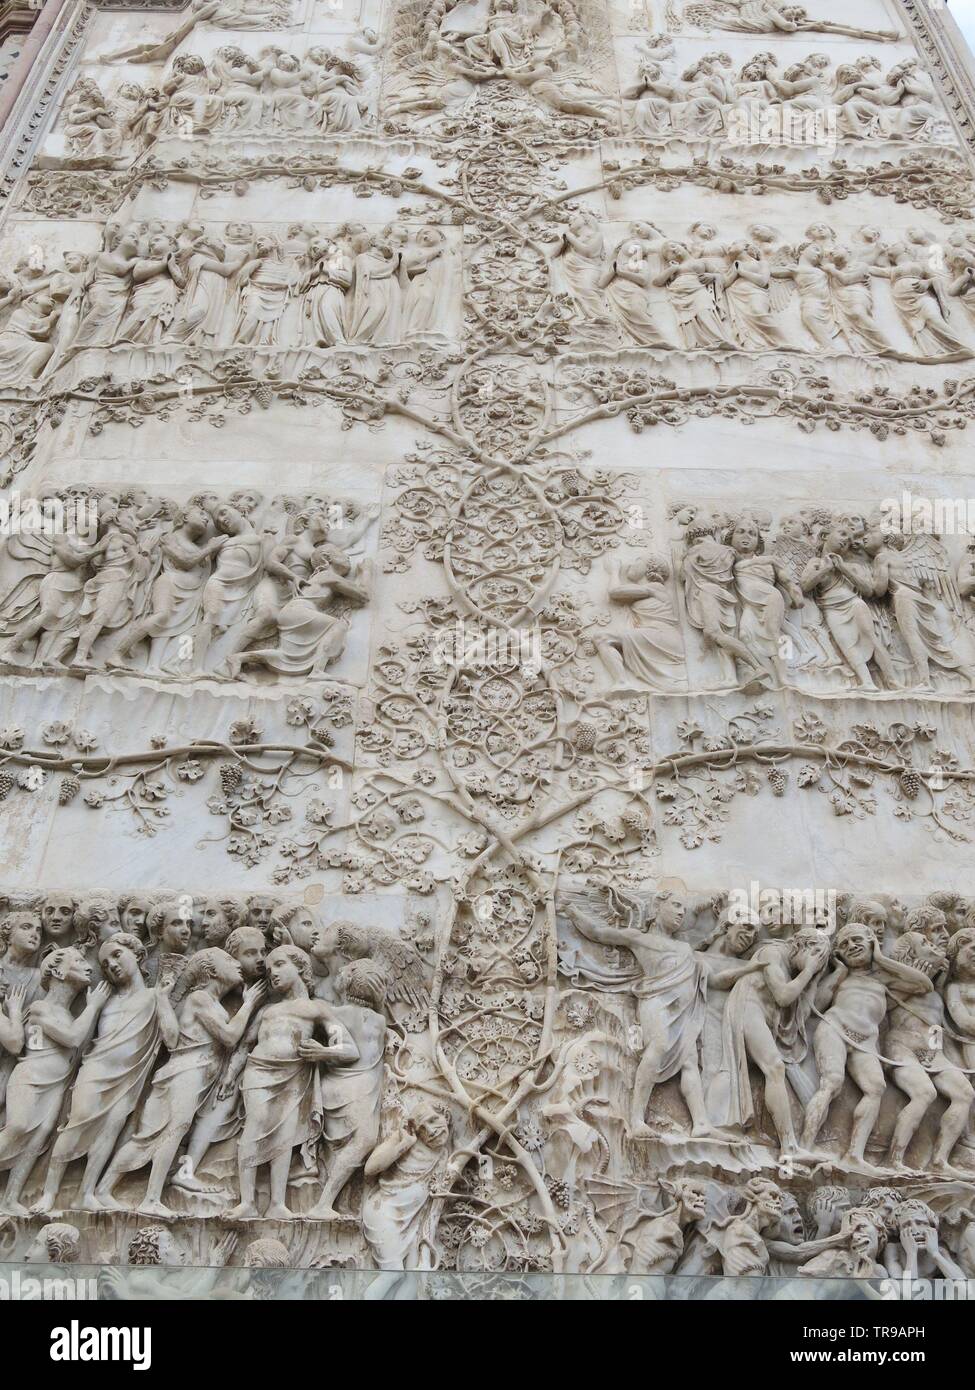 Close-up of the bas relief sculptures showing detail of the biblical panels on the front façade of the magnificent Orvieto cathedral. Stock Photo